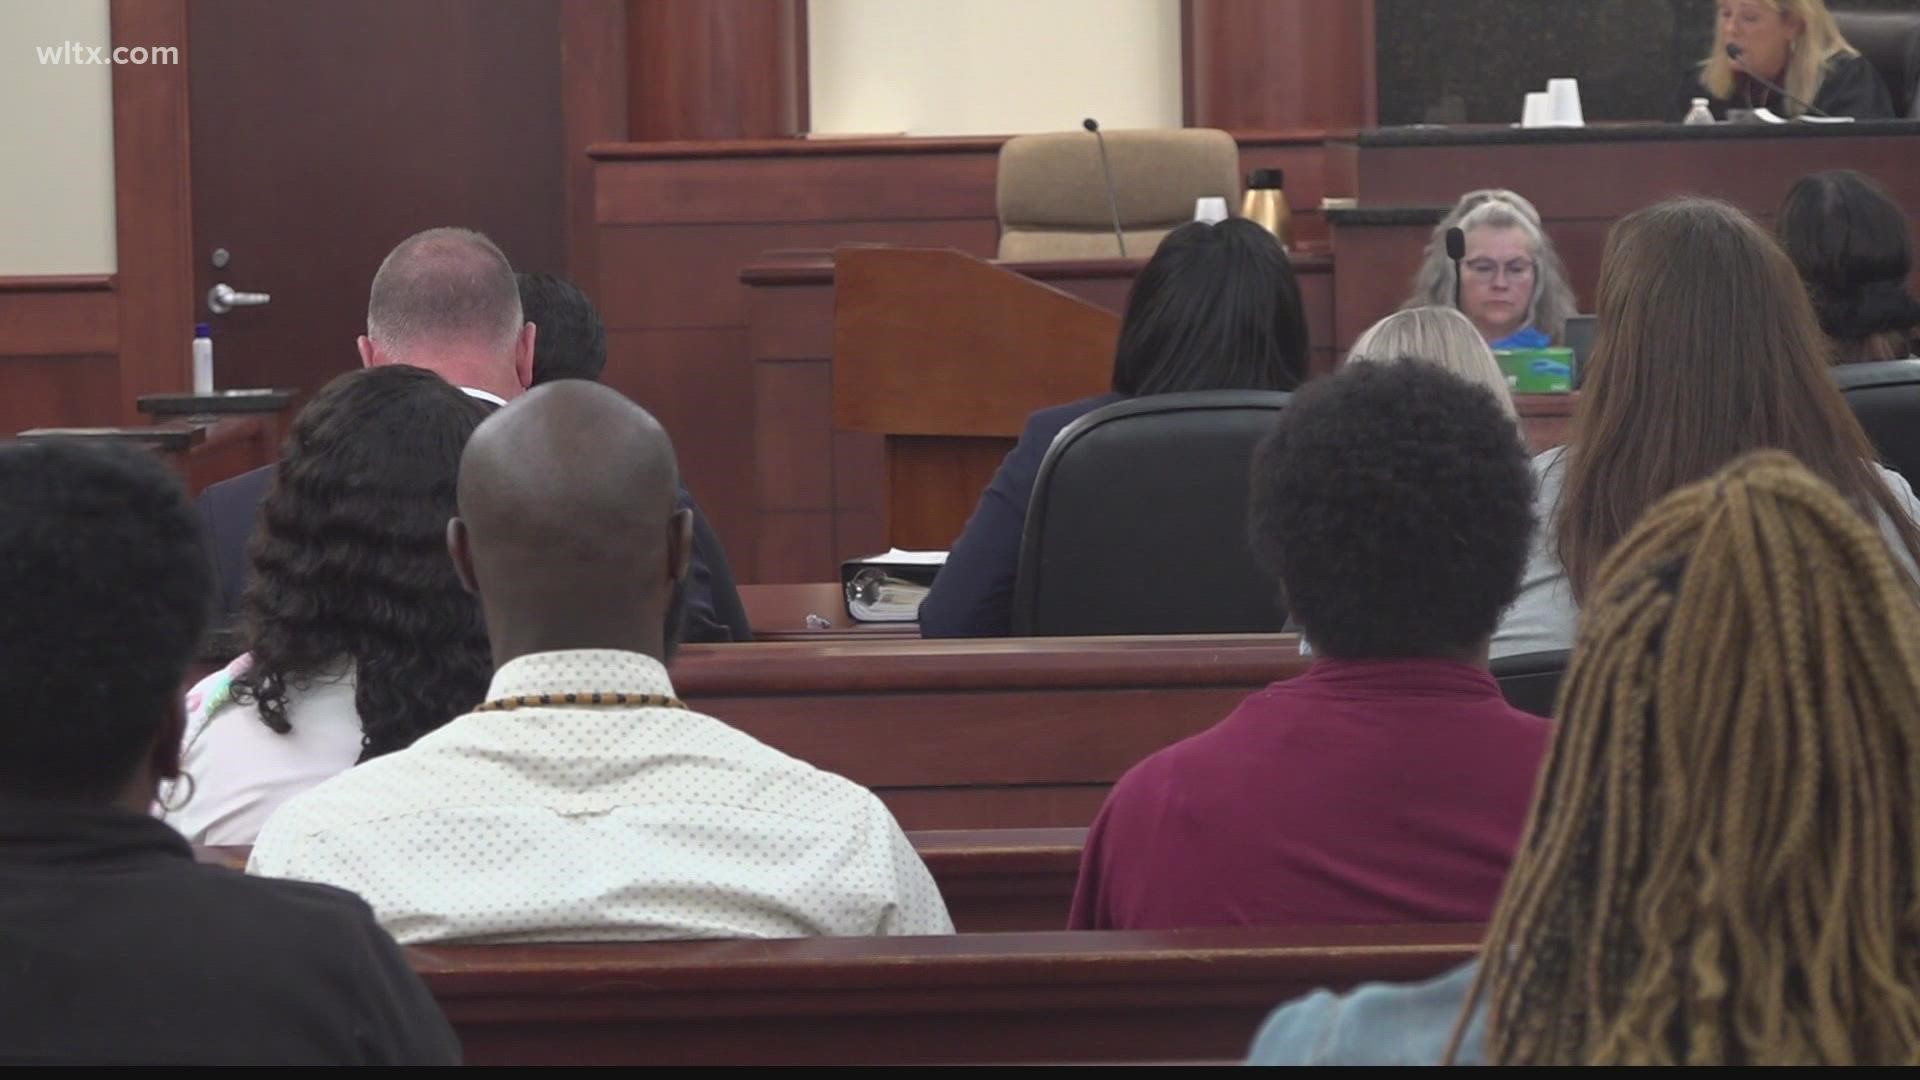 In a Lexington County courthouse, prosecutors and defense attorneys laid out their cases in the trial of Quayshan Xzander Clark.